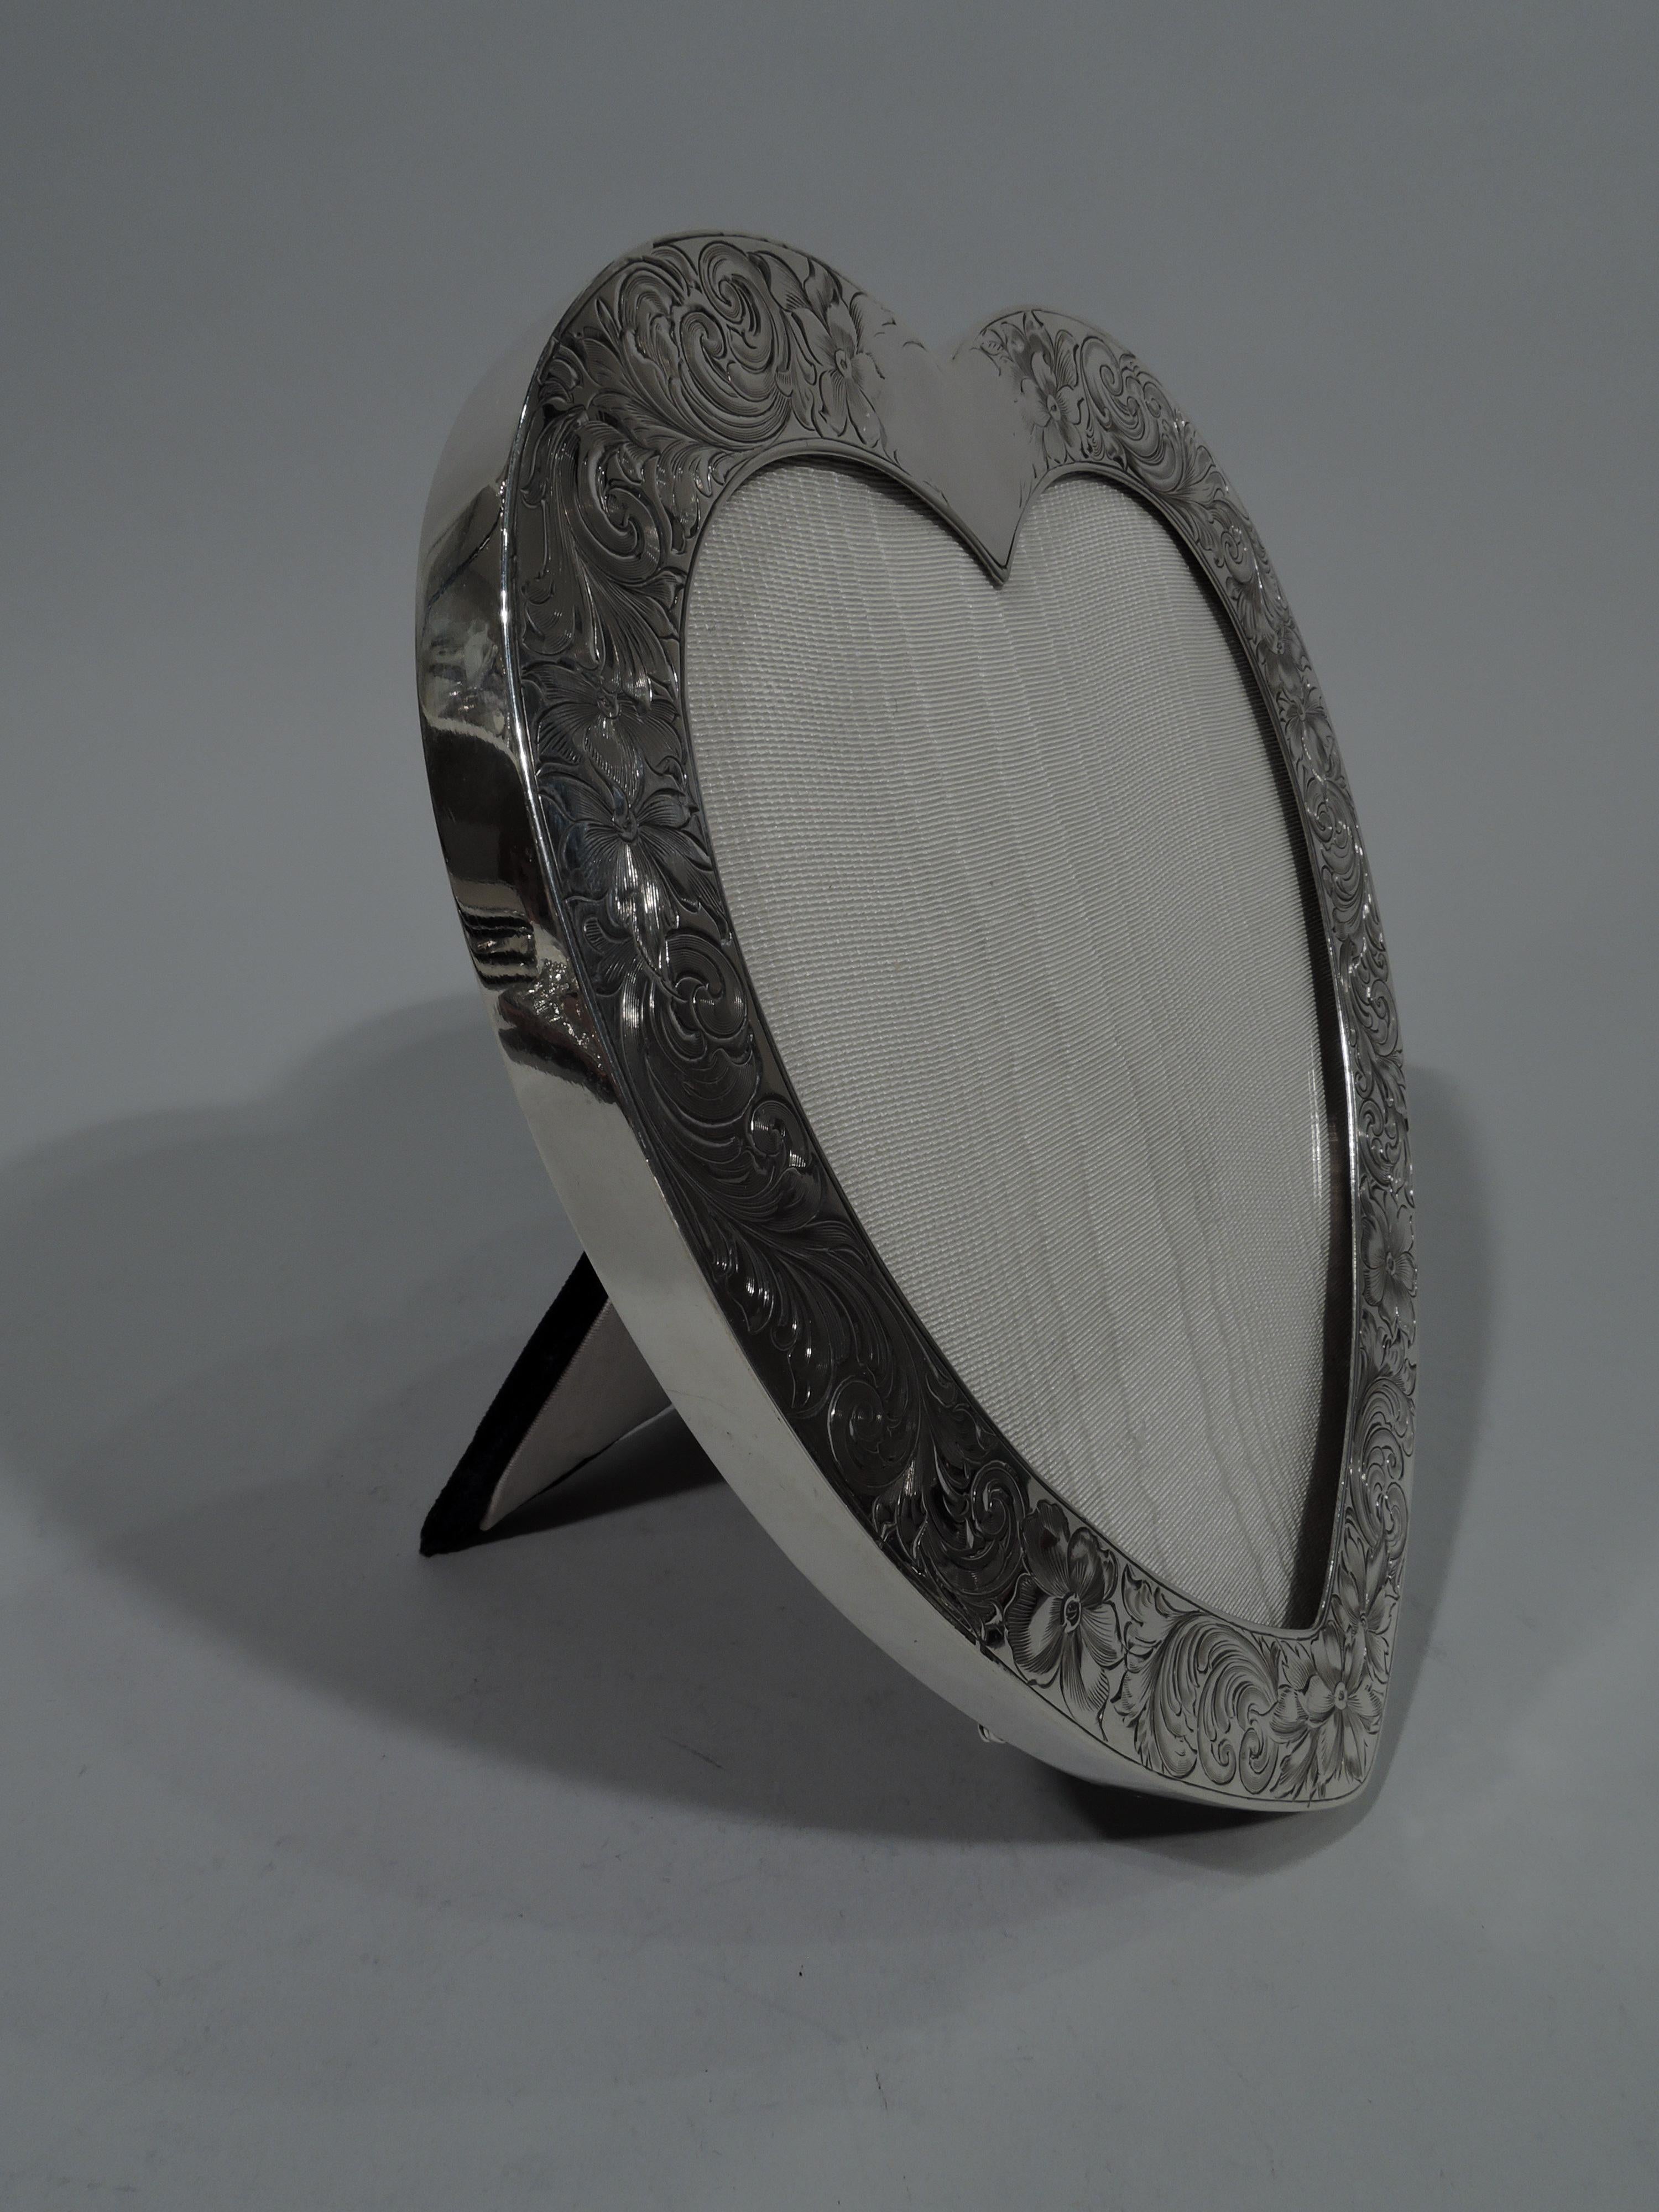 Romantic sterling silver heart frame. Made by Gorham in Providence, circa 1910. Flat surround with engraved scrolls and flowers. Shaped cartouche (vacant) at top. With glass, silk lining, and velvet back and hinged support. Fully marked including